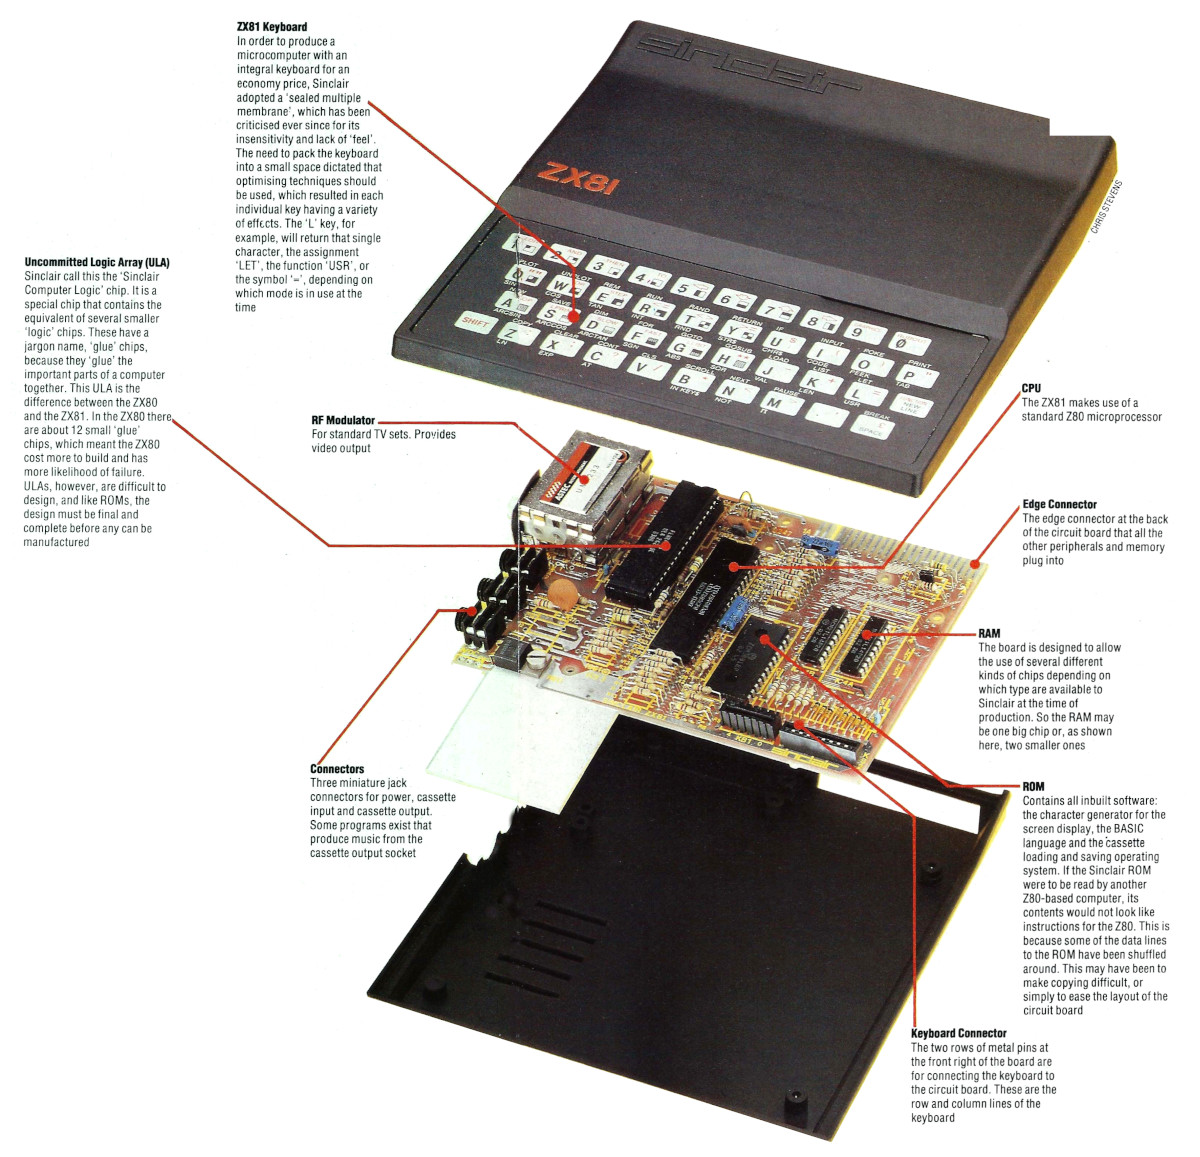 A nice exploded view of the ZX81, which appeared in 1983's 